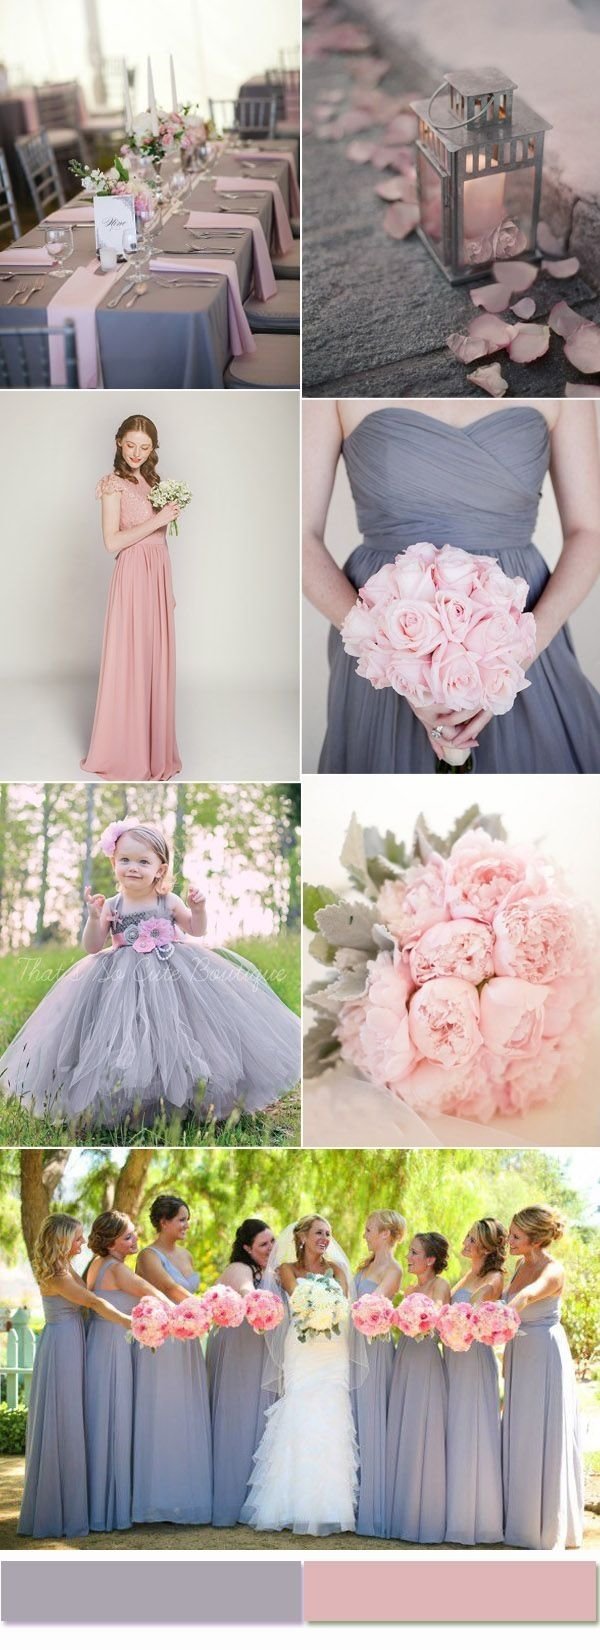 10 Attractive Cheap Wedding Ideas For Spring 381 best wedding color ideas images on pinterest wedding ideas 2022